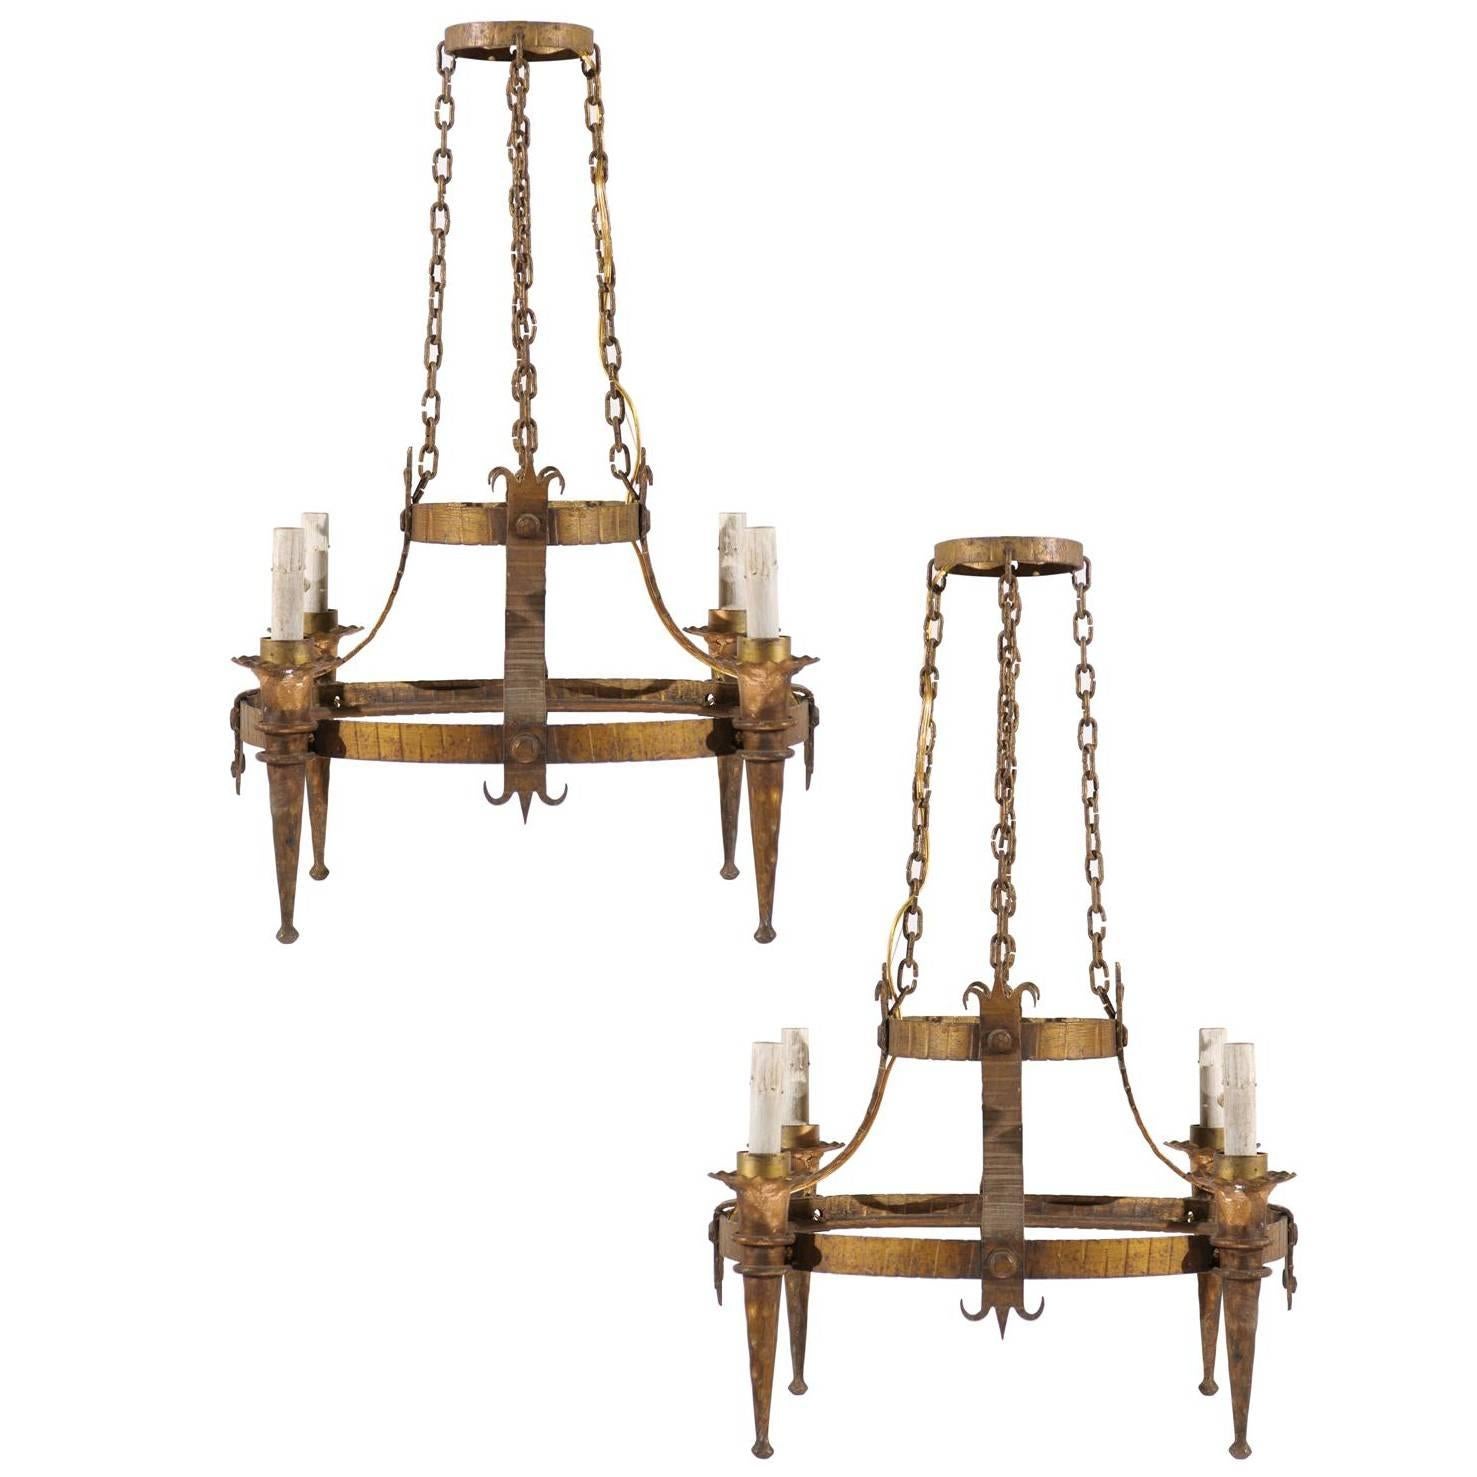 Pair of French Gilt-Metal Ring Chandeliers w/Torch Lights & Fleur-de-Lys Accents